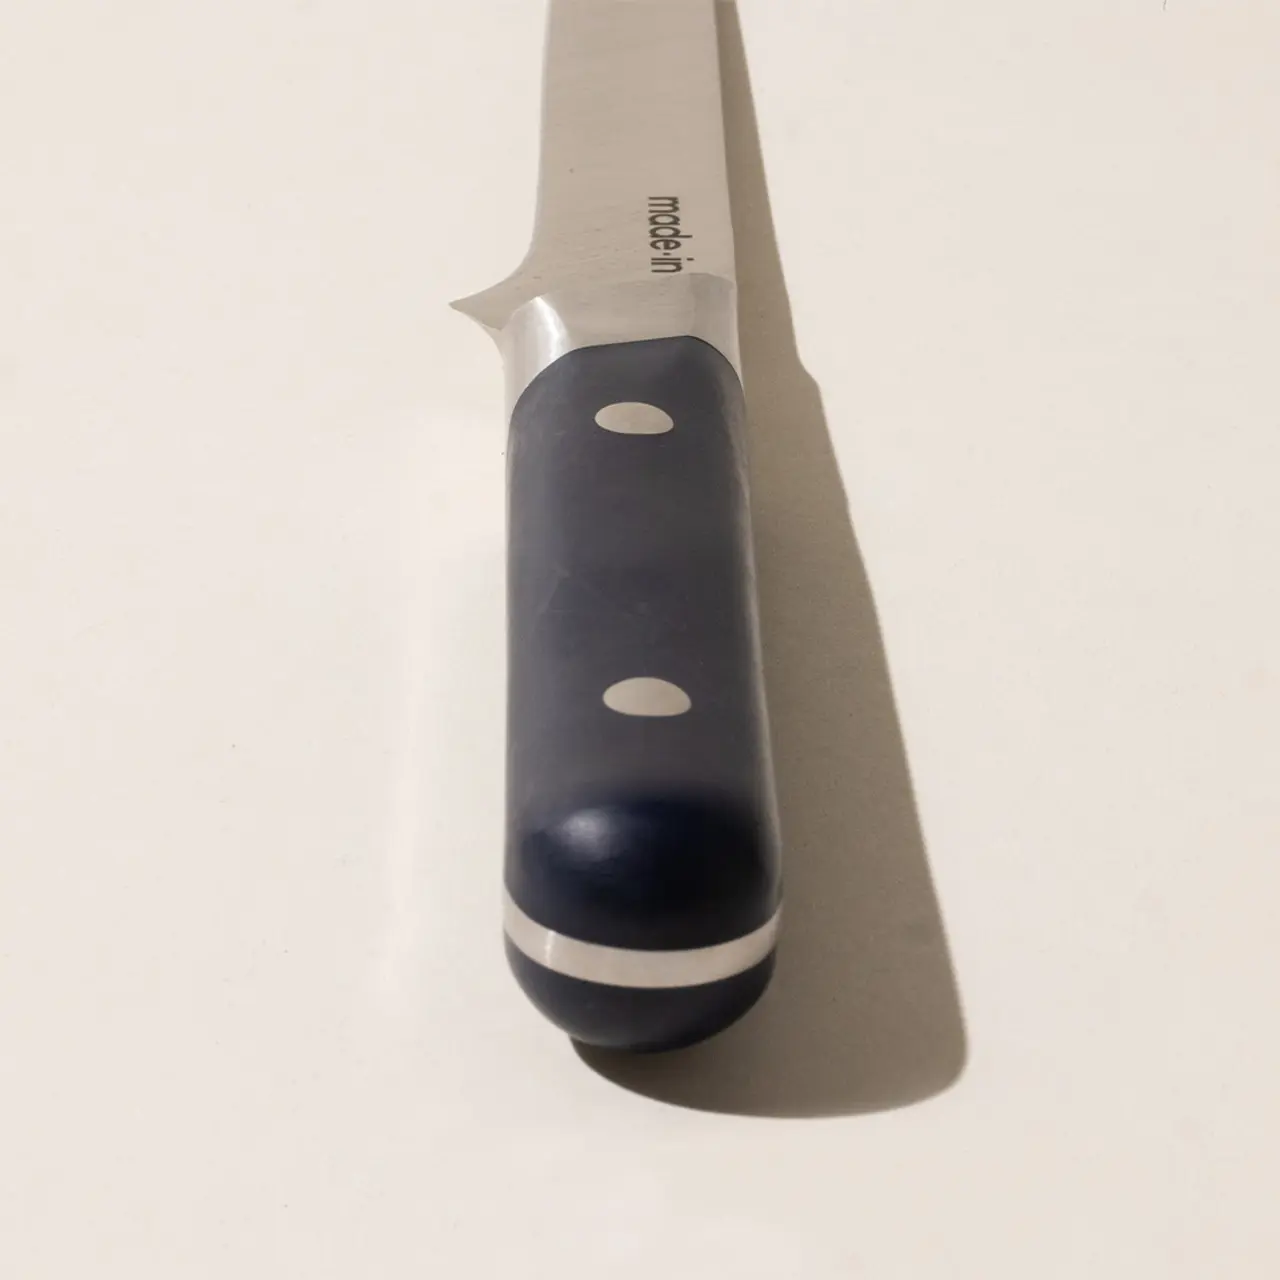 A close-up of a stainless steel kitchen knife with a black handle on a light background.